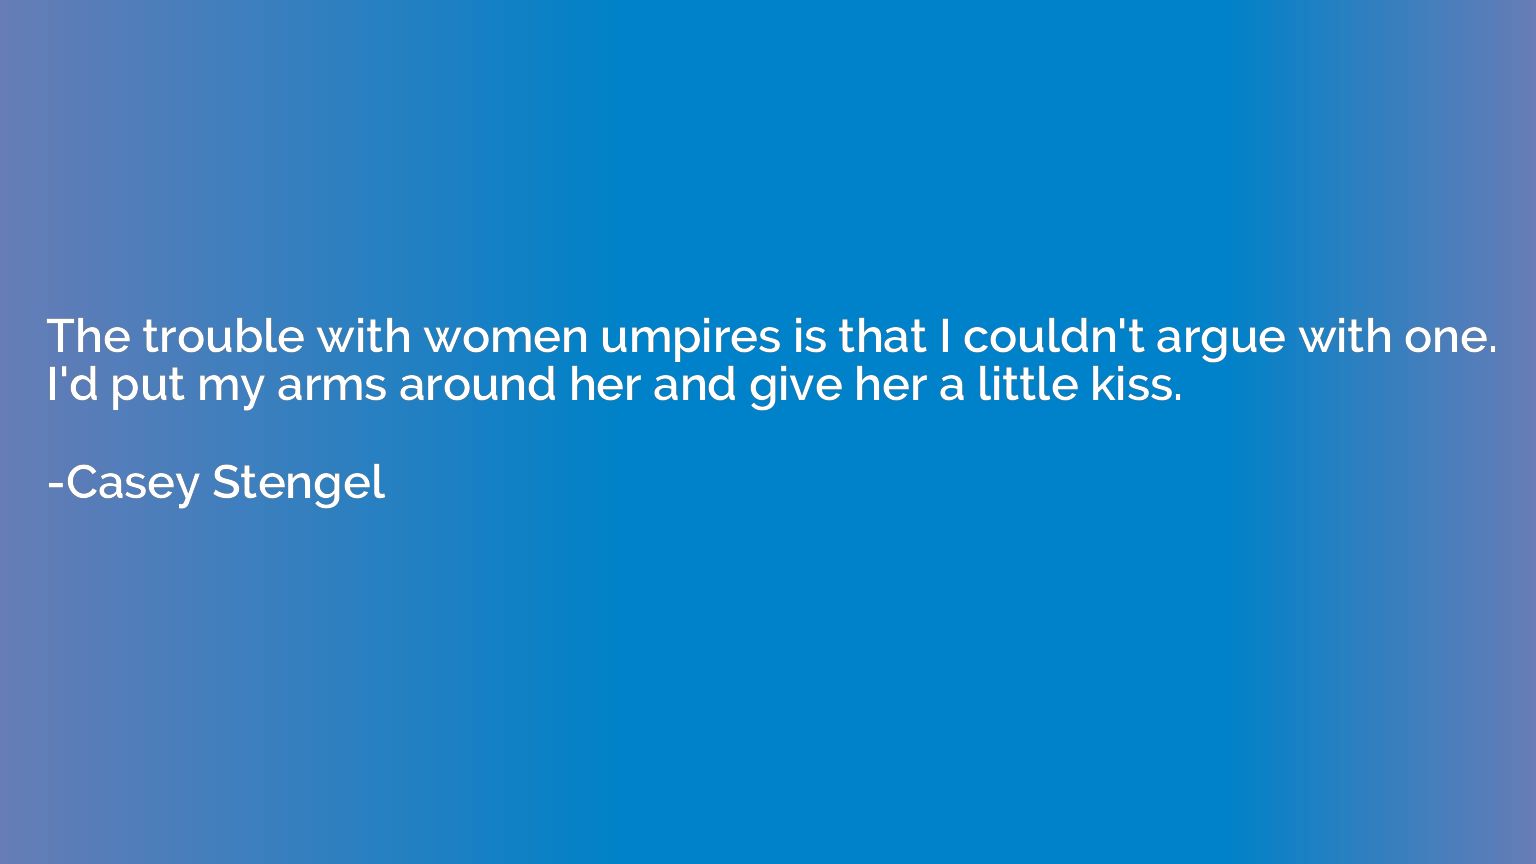 The trouble with women umpires is that I couldn't argue with